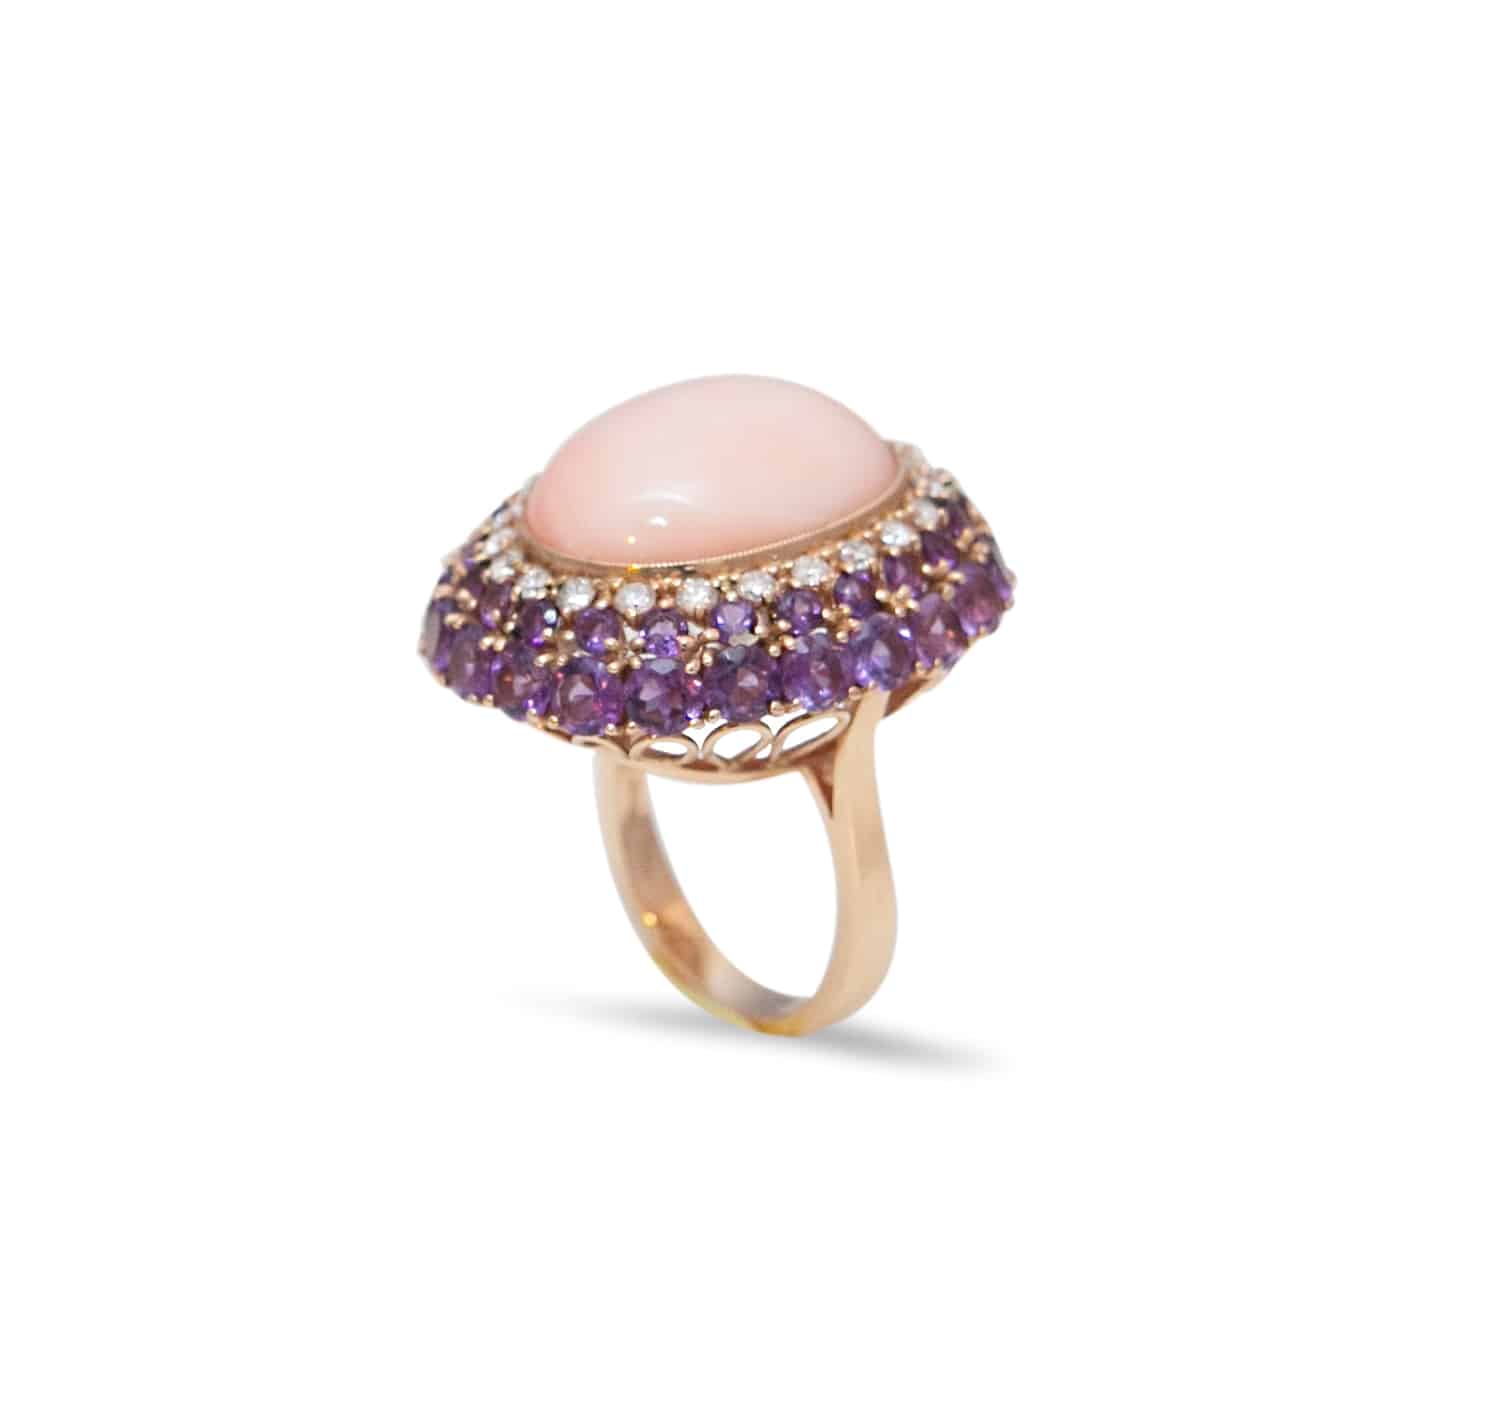 Pink coral , amethysts and diamonds 18K Yellow Gold cocktail ring